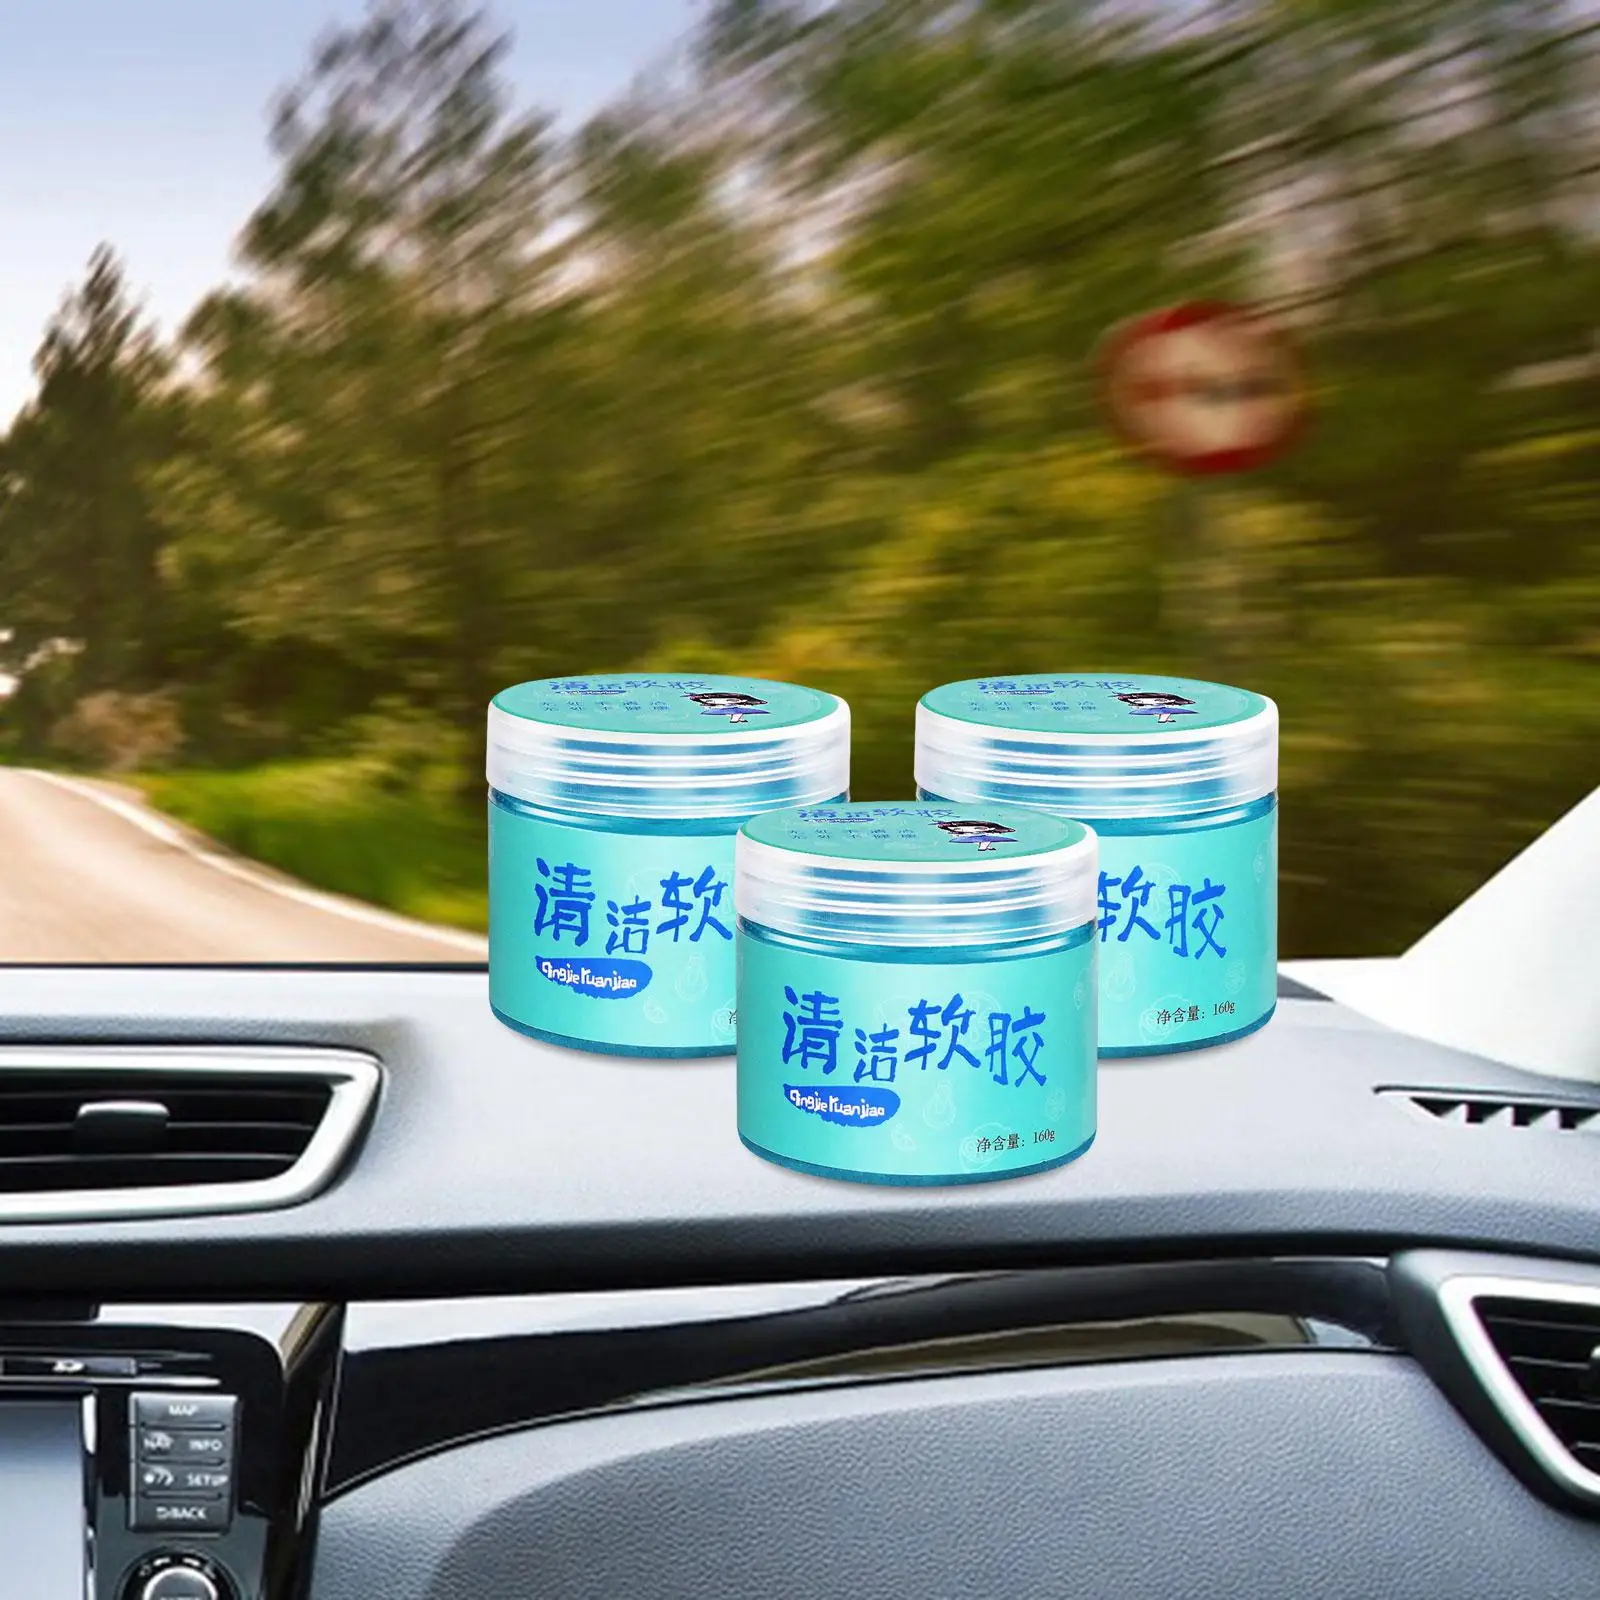 Dust Cleaning Mud Electronics Cleaning Car Cleaner Putty Interior Car Cleaning Gels for PC Air Vents Tablet Keyboard